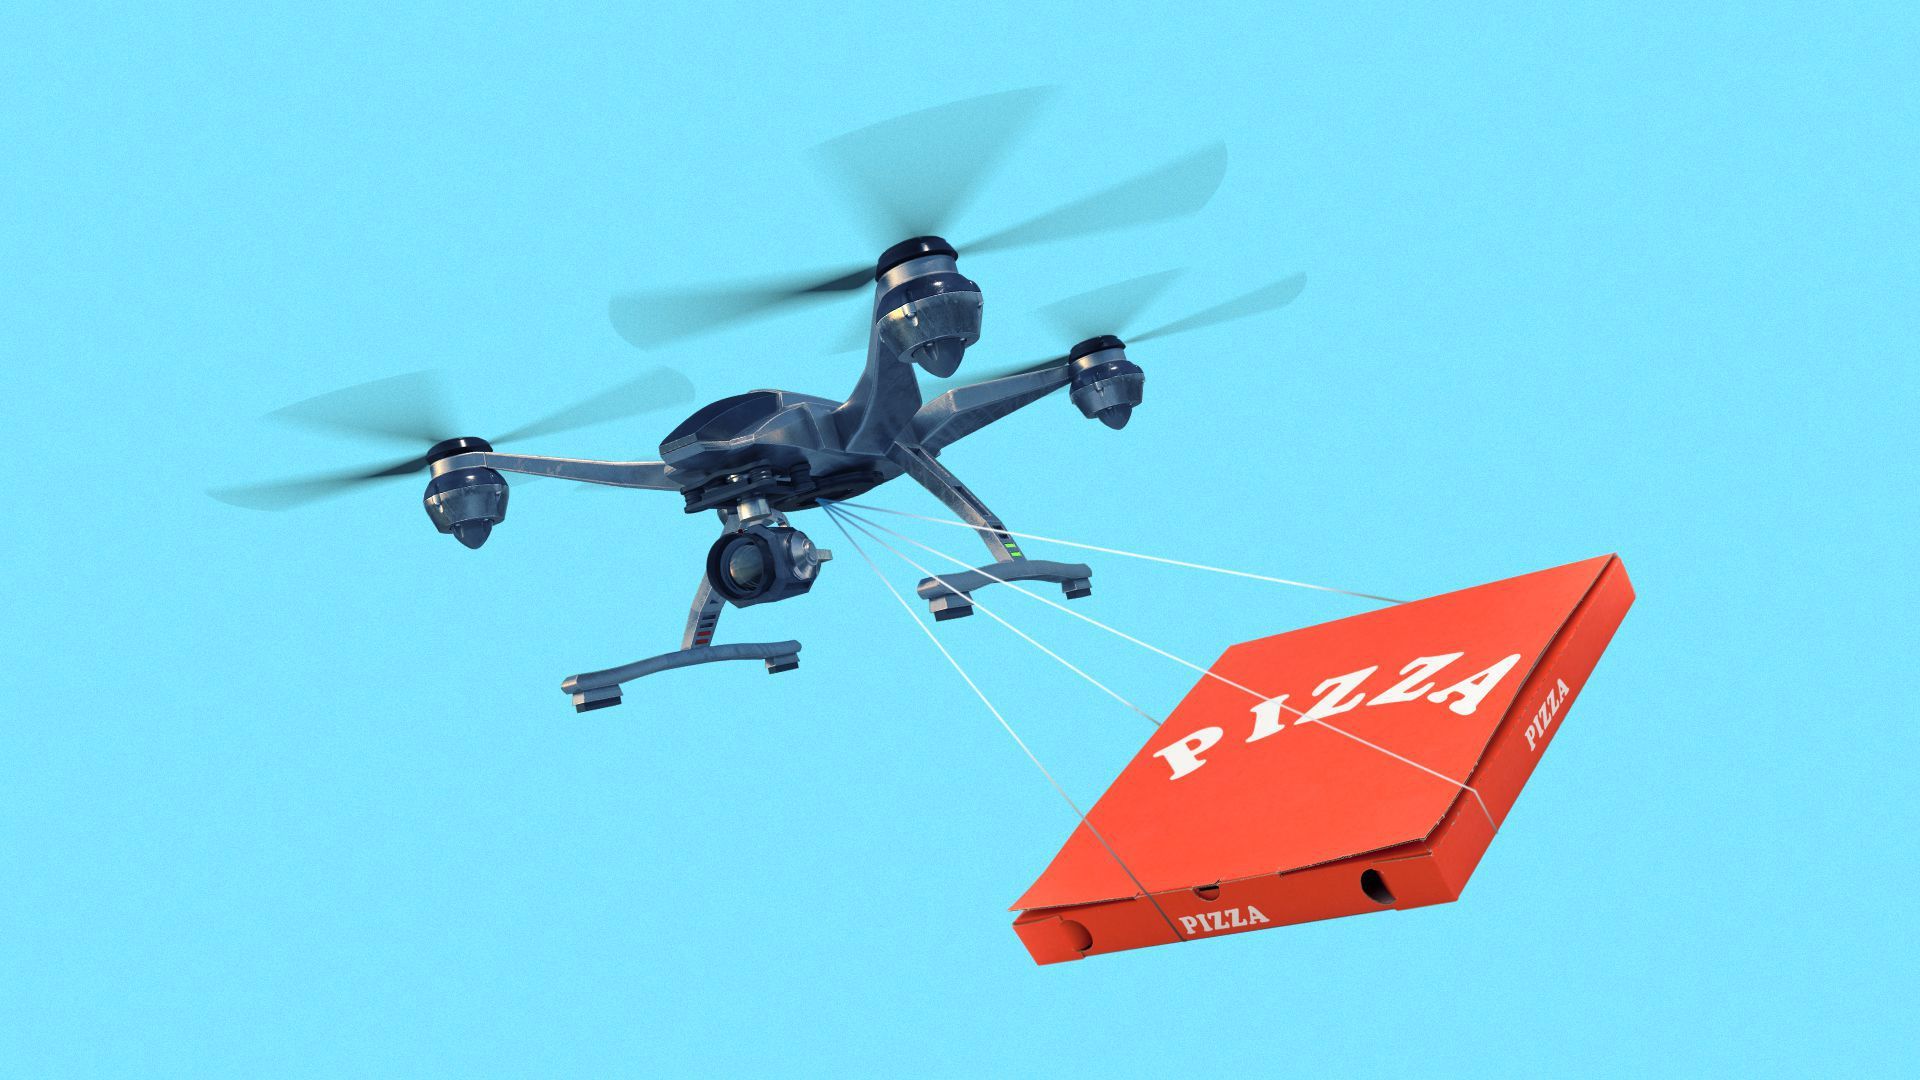 Drone carrying box of pizza